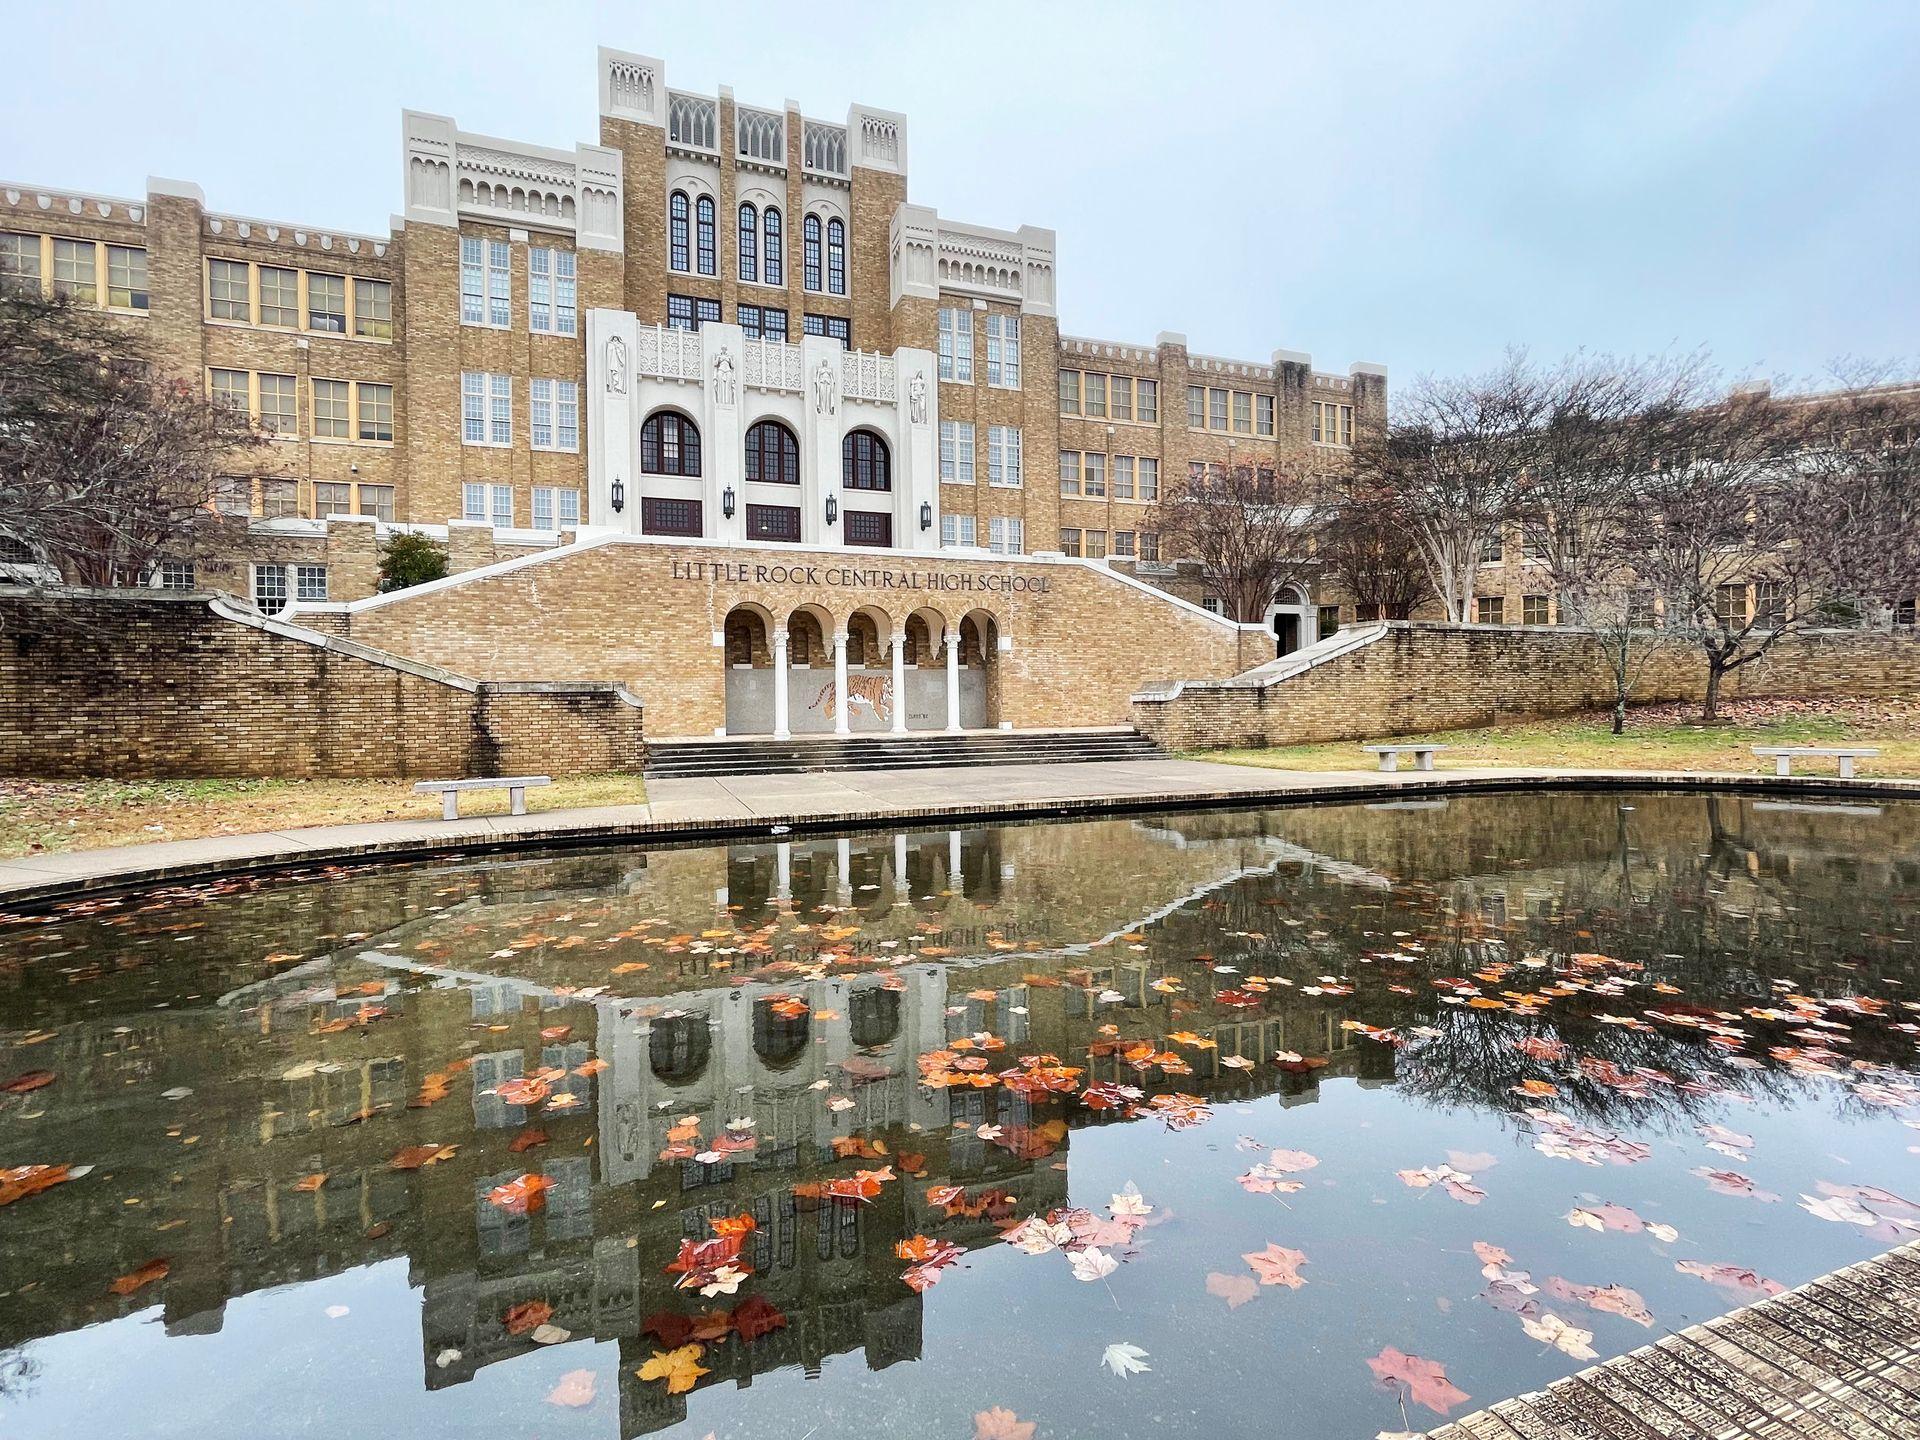 The Little Rock Central High School reflecting into a pool of water below. A few orange leaves float in the pool.